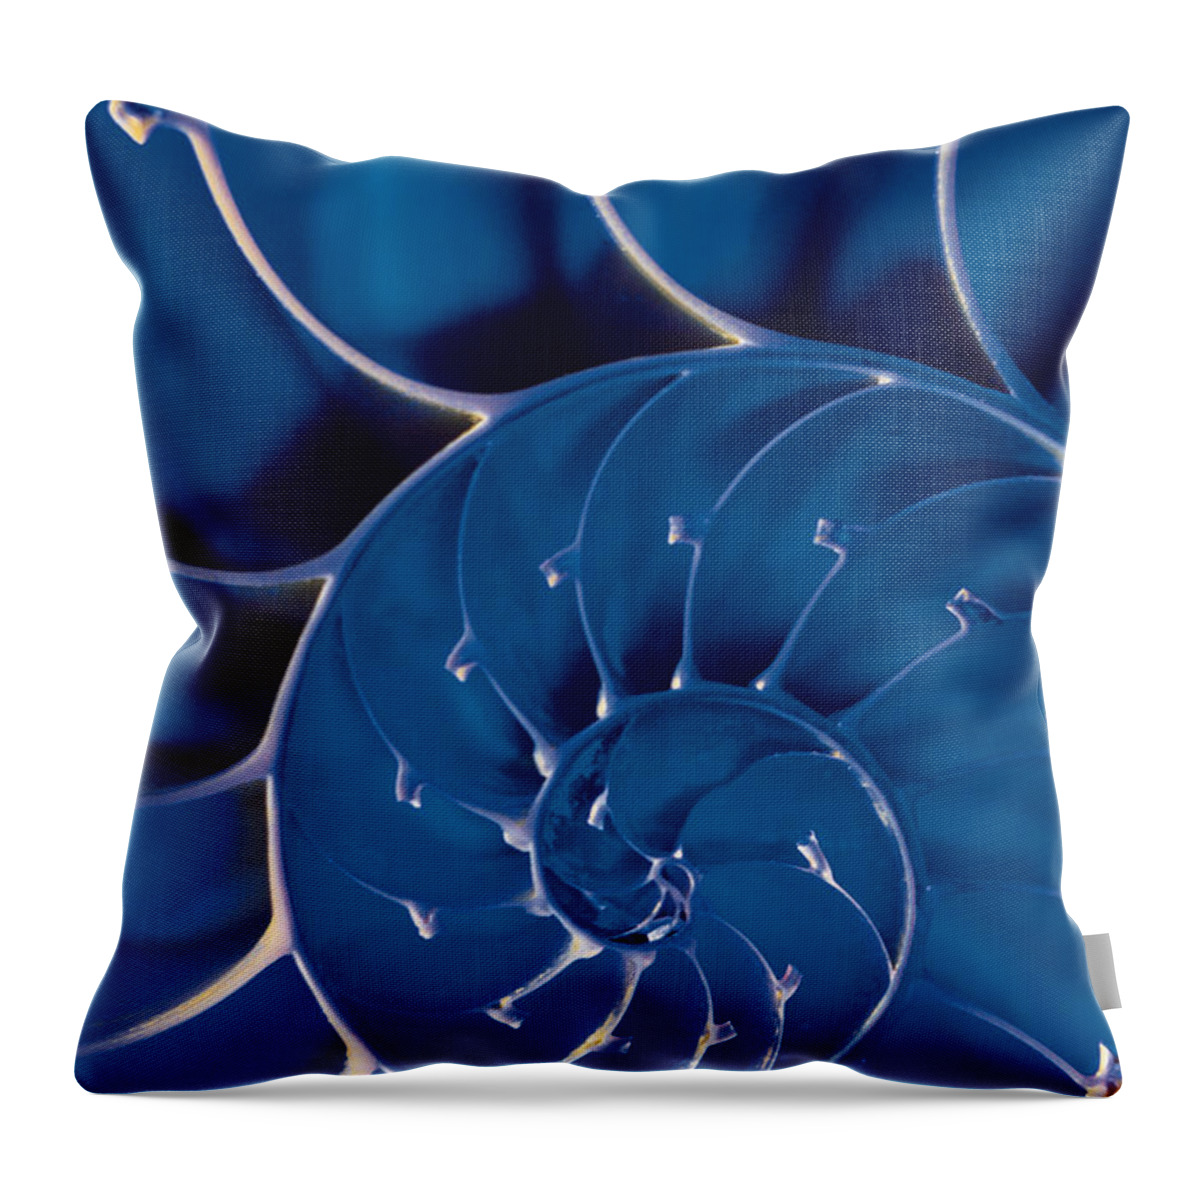 Animal Shell Throw Pillow featuring the photograph Cross-section Of Blue Nautilus Shell by Comstock